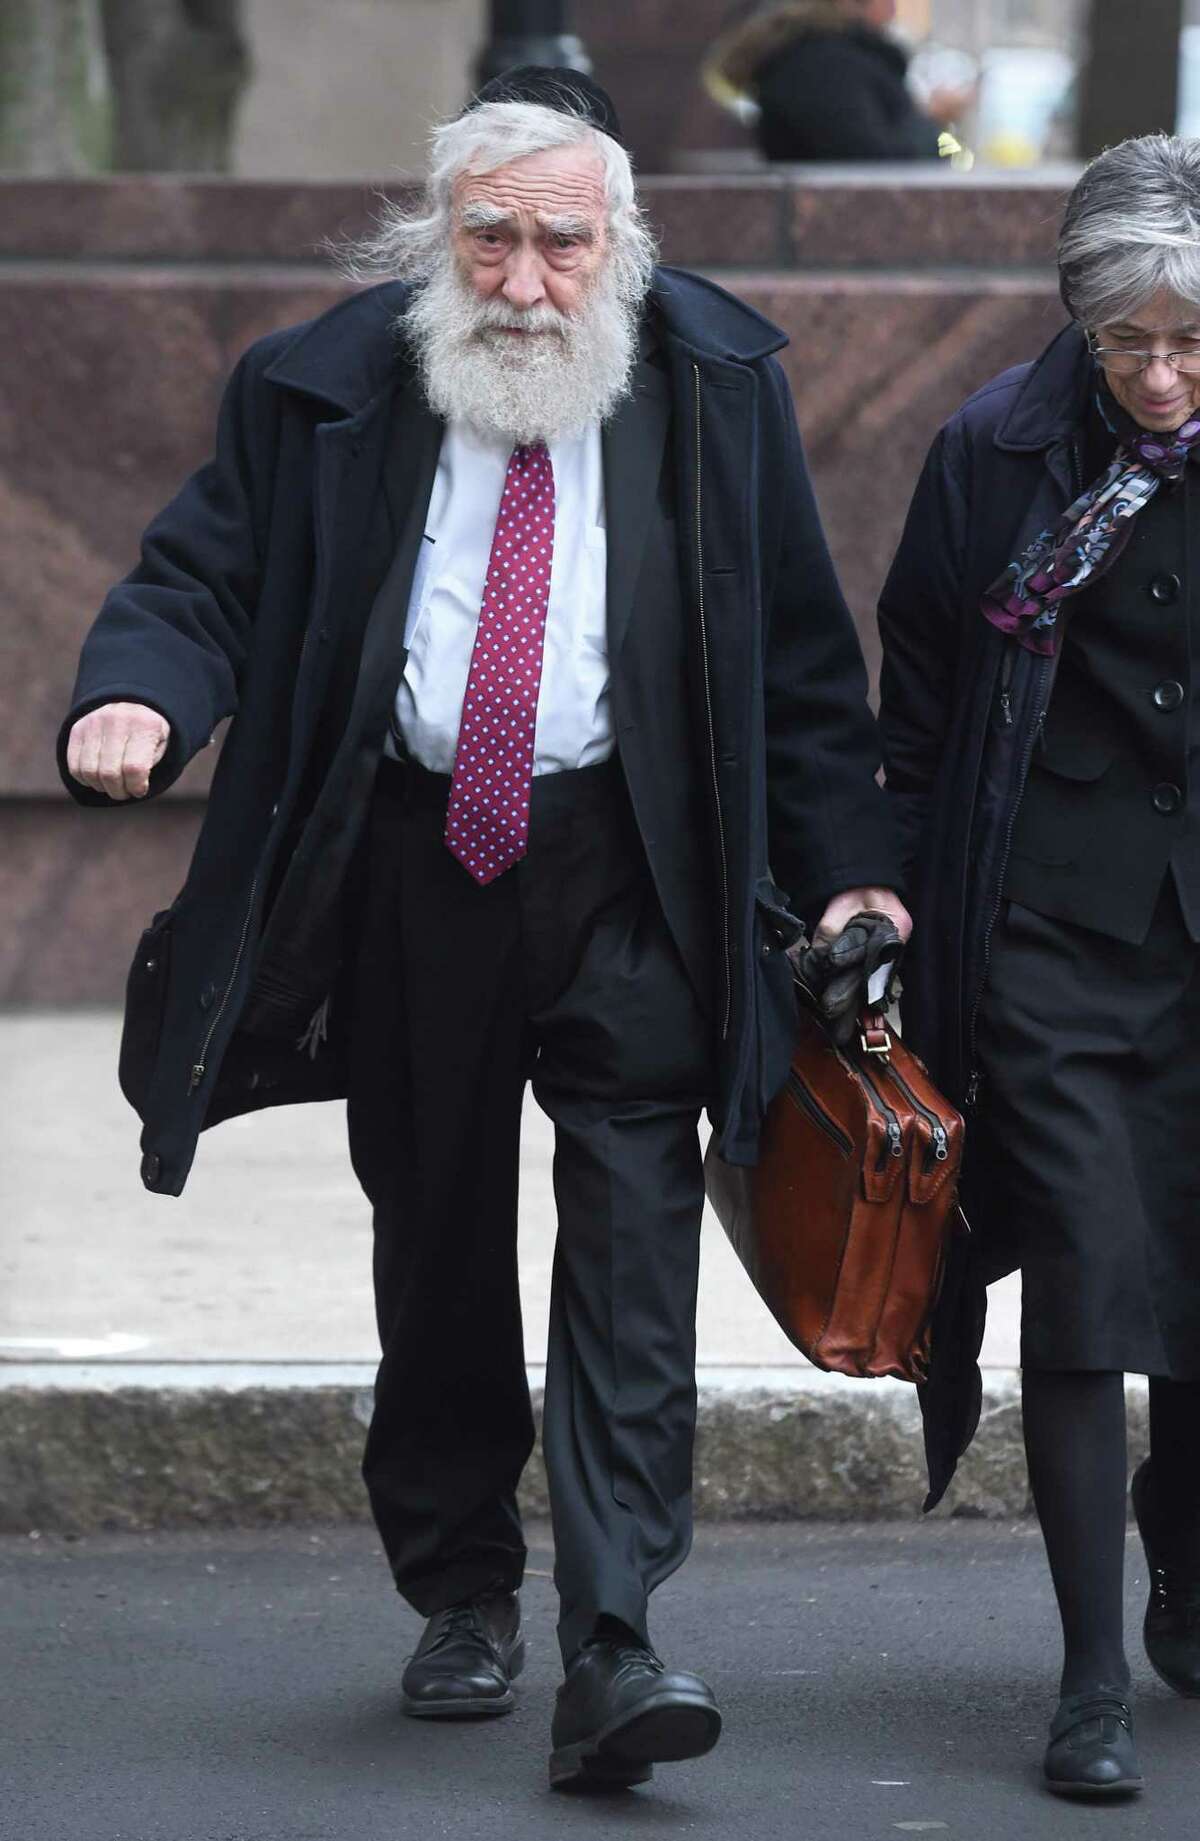 Rabbi Daniel Greer walks to Superior Court in New Haven with his wife, Sarah, Nov. 20, 2019.